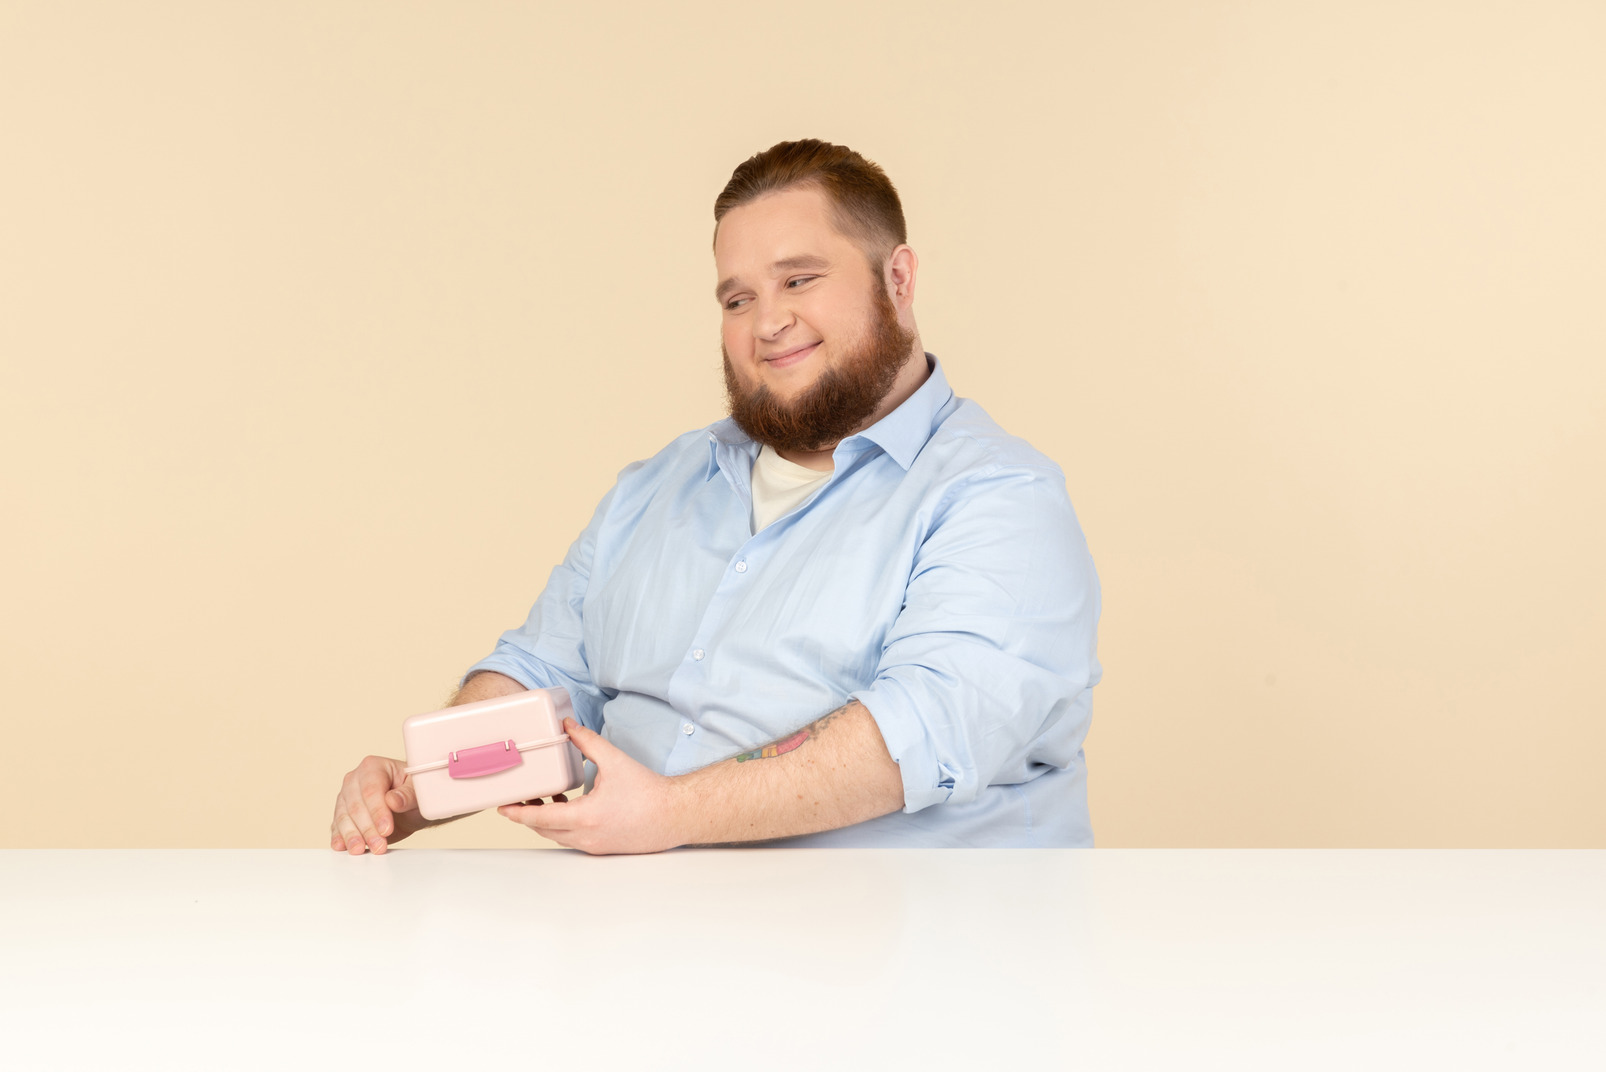 Big man sitting at the table and holding lunchbox